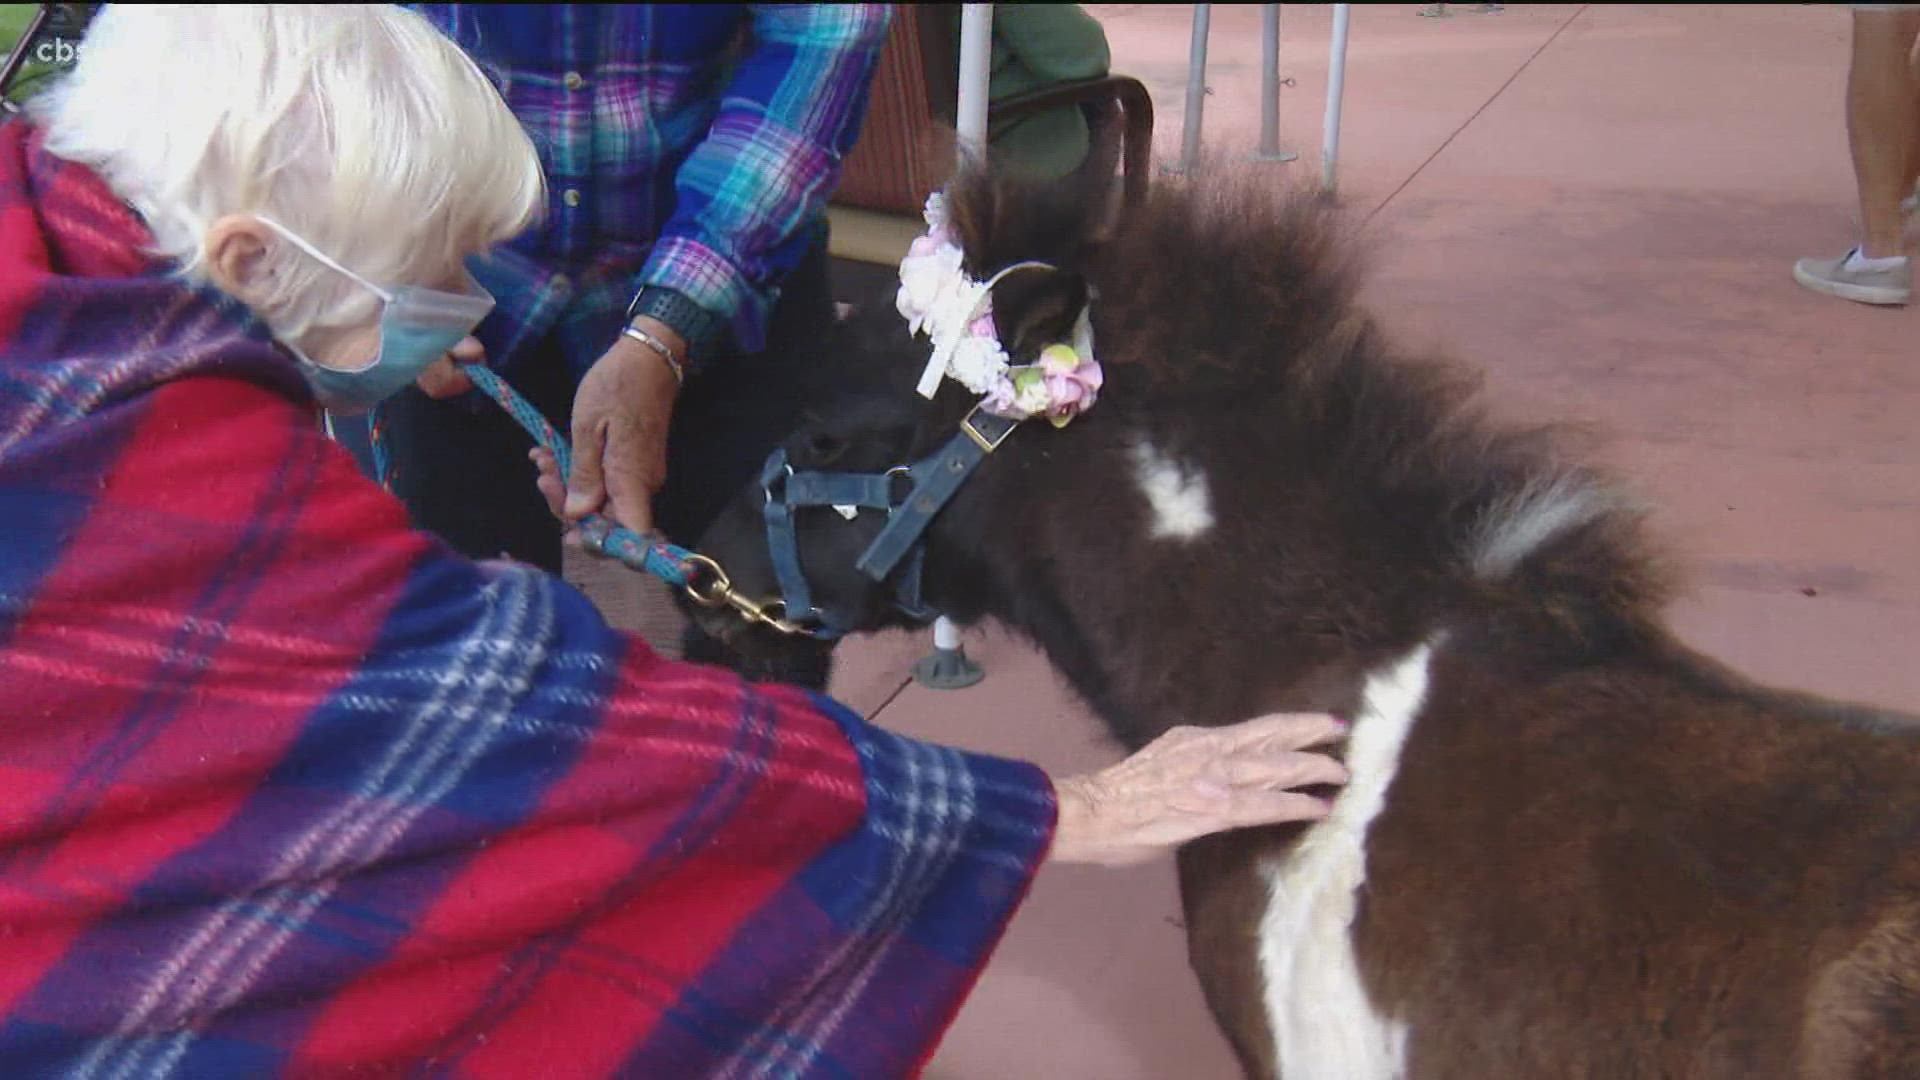 Mini horse senior pet therapy program commences after a pandemic pause. News 8 photojournalist, Coleen Murphy, shows how they make a real difference.